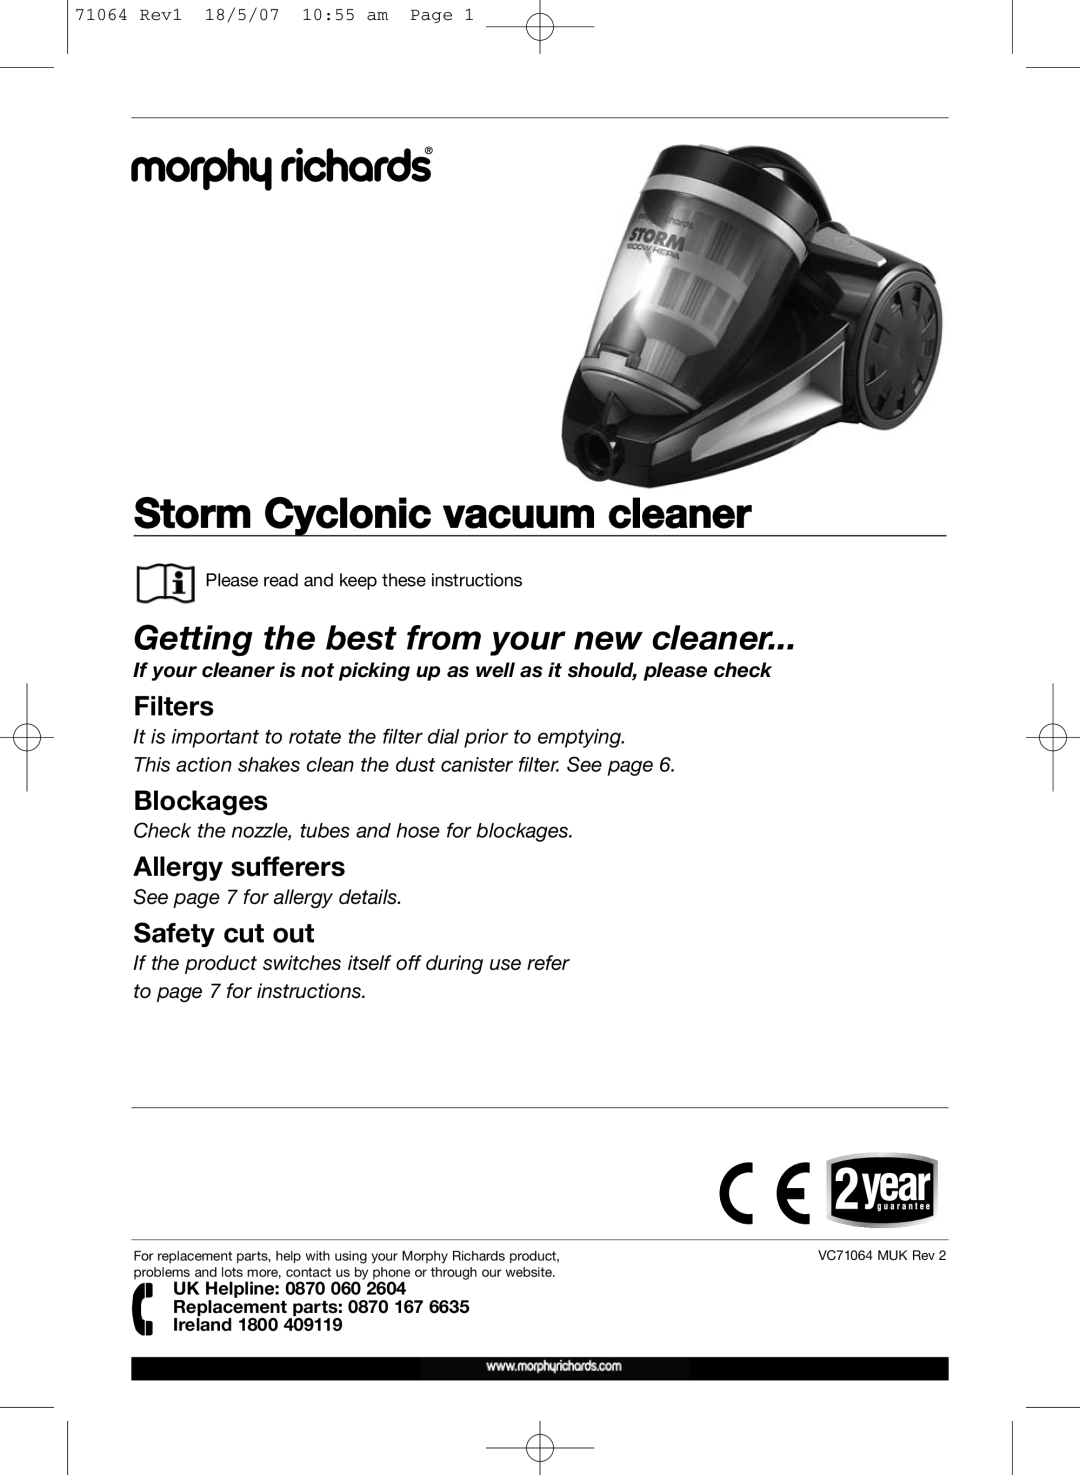 Morphy Richards VC71064 MUK manual Storm Cyclonic vacuum cleaner, Getting the best from your new cleaner, Filters 